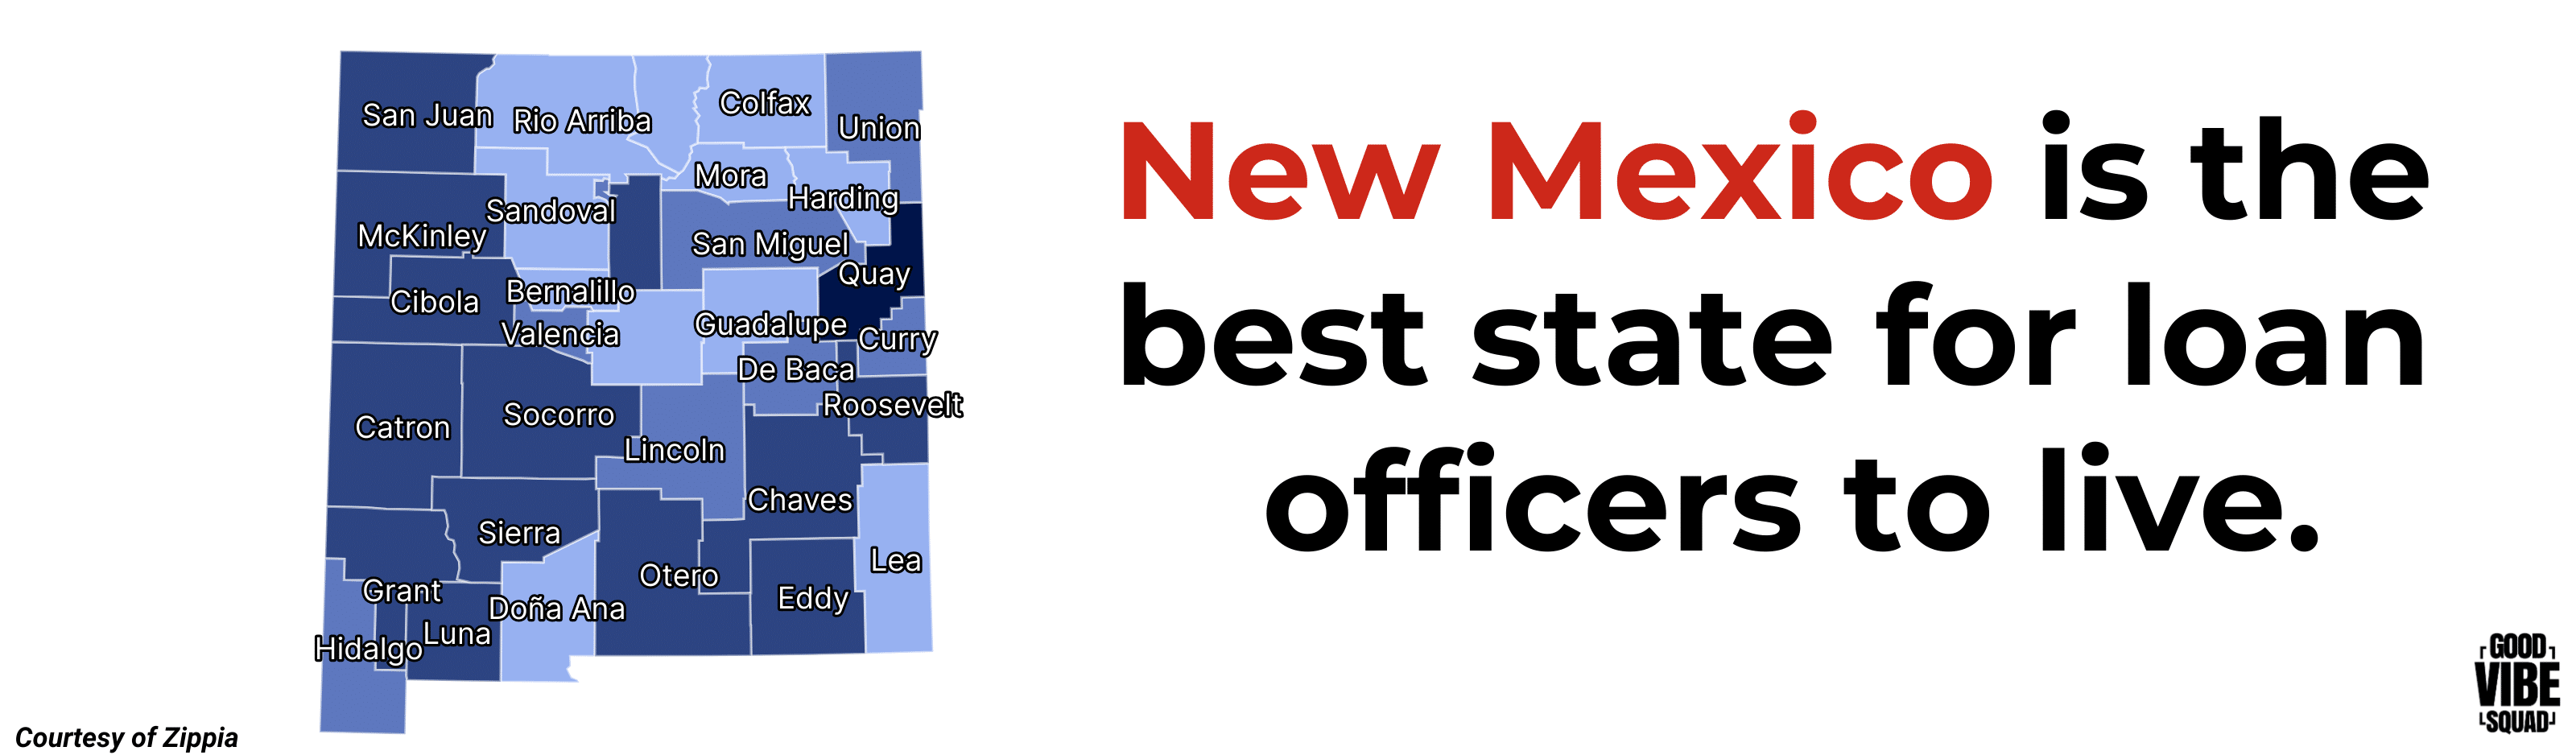 graphic displaying that New Mexico is ranked as the best state for loan officers to live